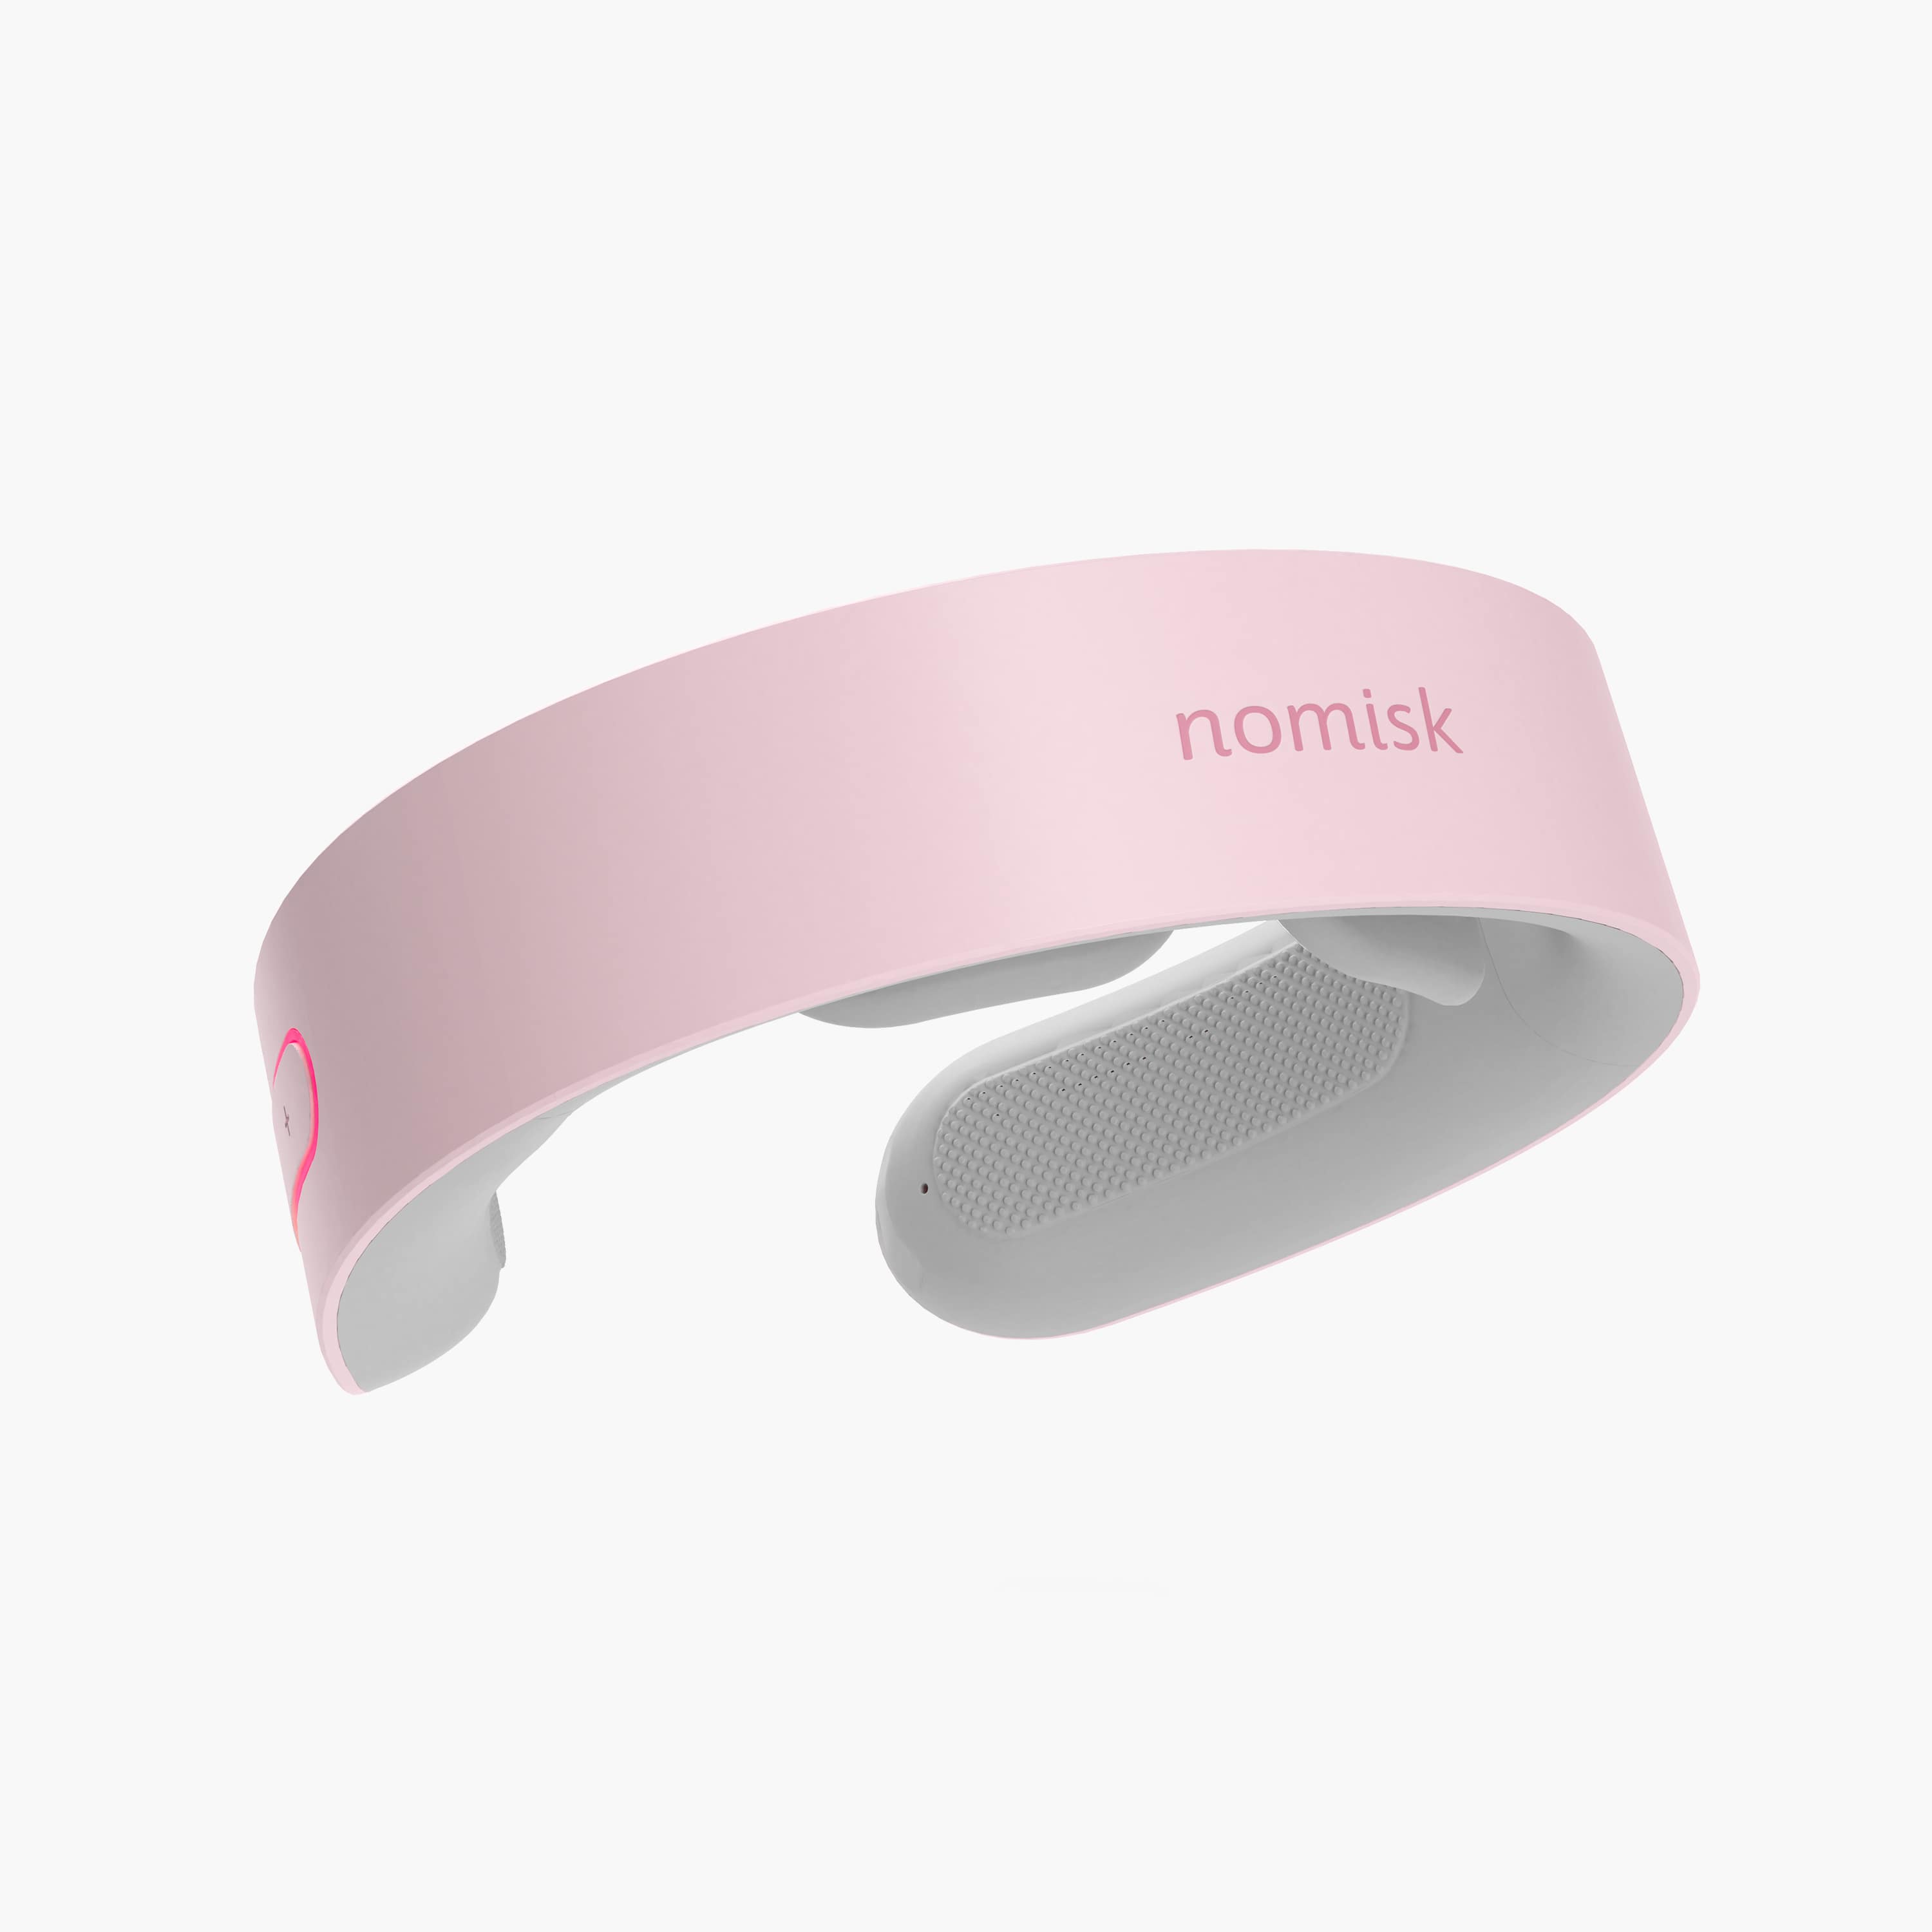 Luna by Nomisk. A pink neck massager that combines heat and pulse therapy to instantly relieve neck pain. Use her to relieve migraines, muscle tension and pain instantly. Shown from a rear view.